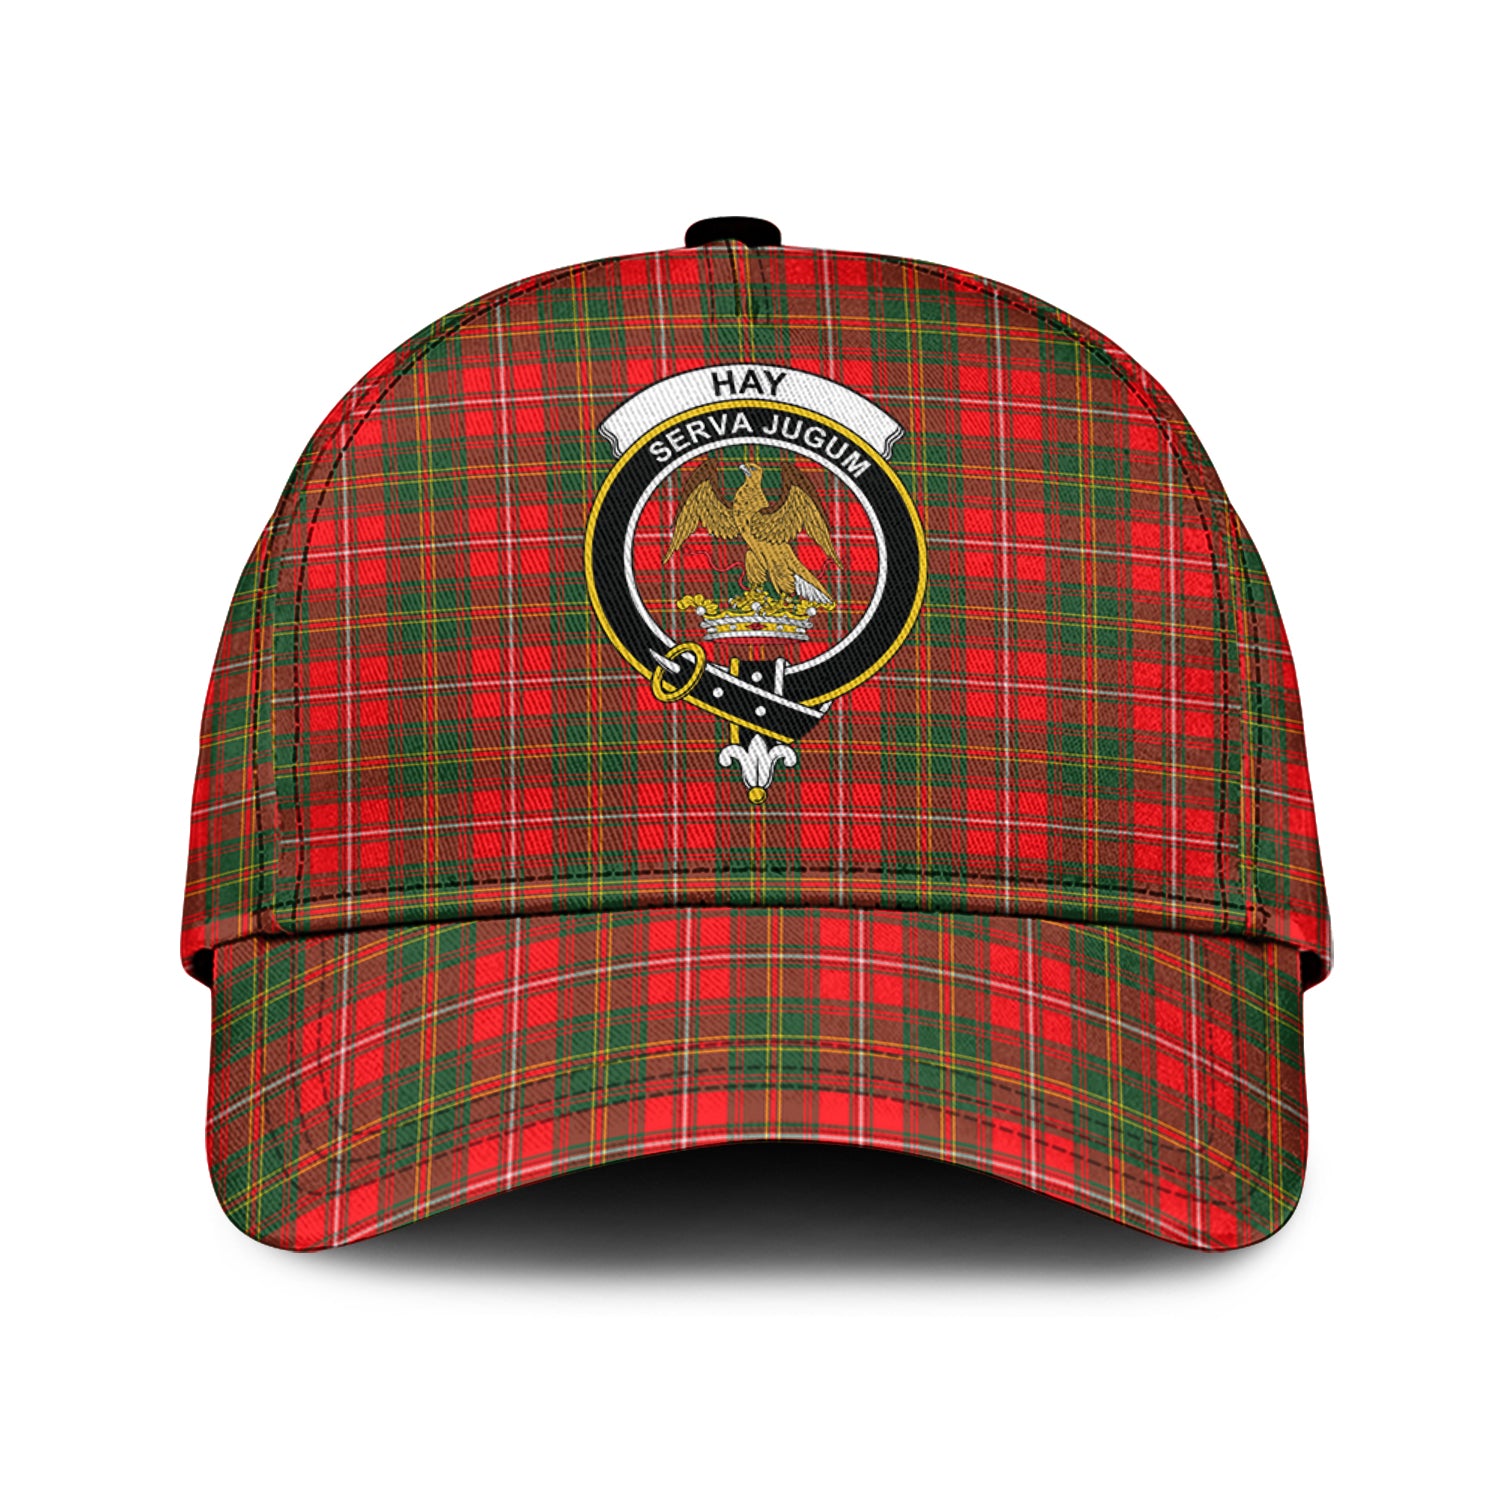 hay-modern-tartan-classic-cap-with-family-crest